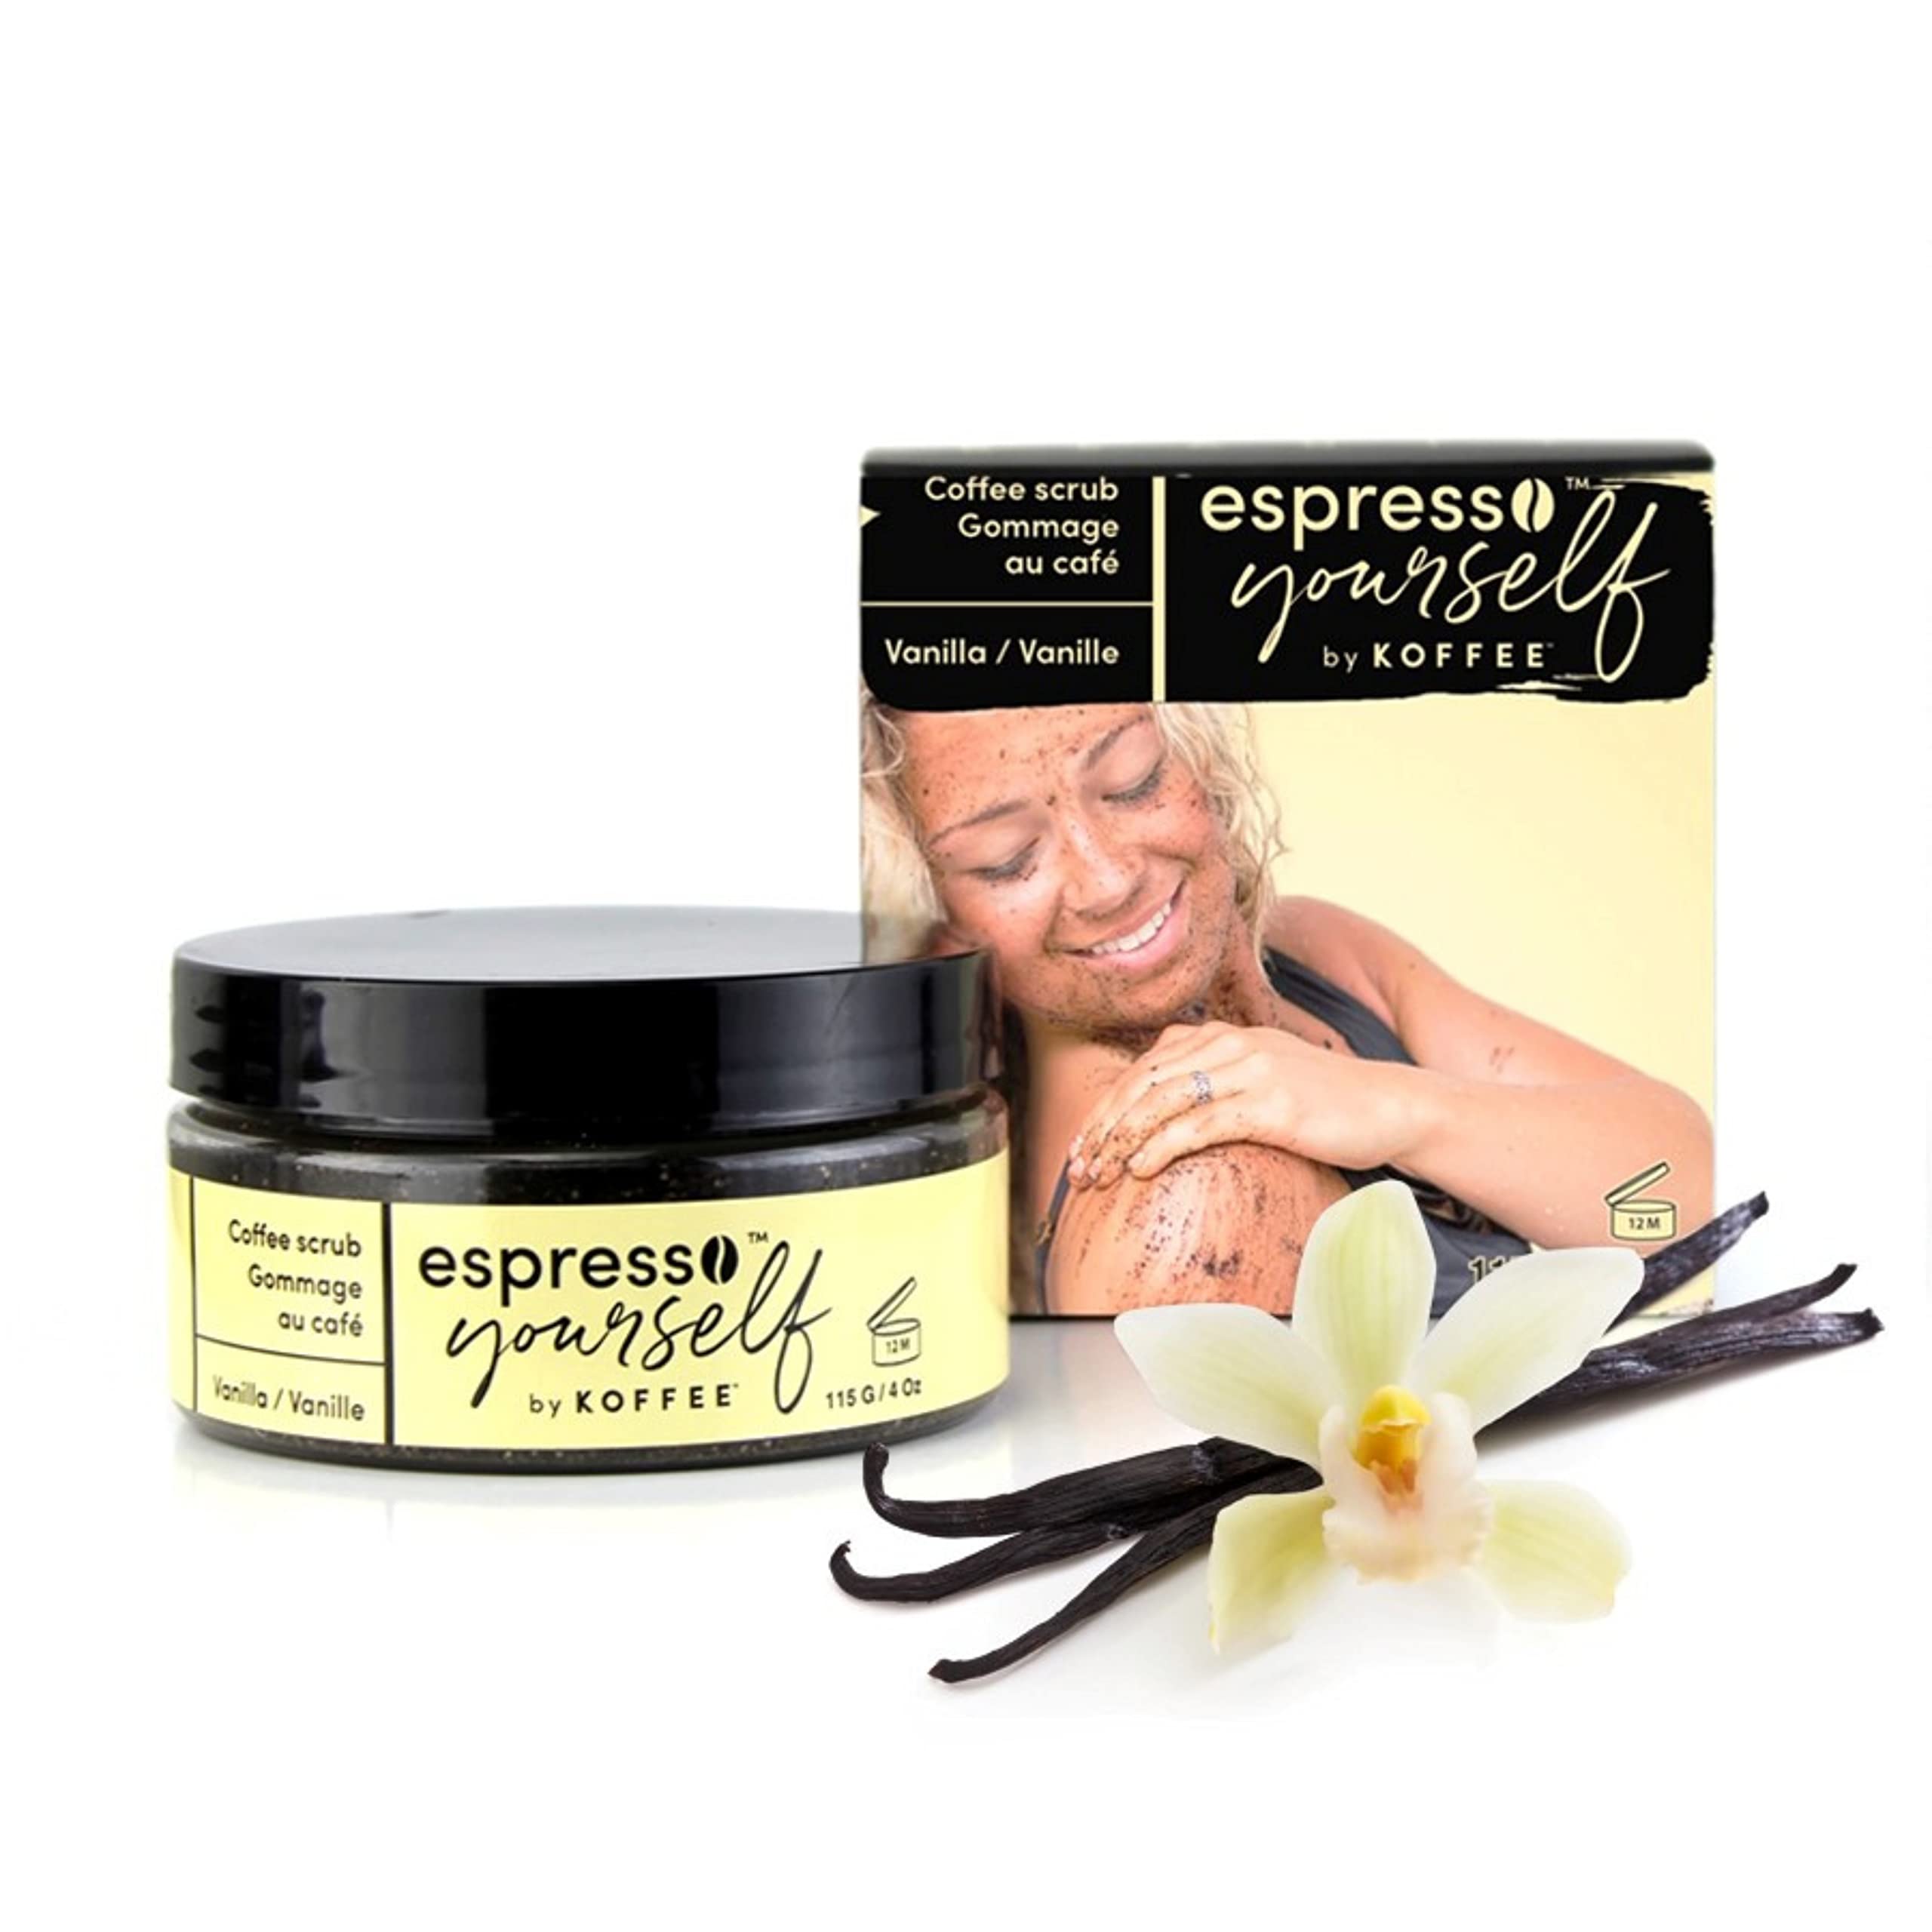 Koffee Beauty Vanilla Coffee Scrub - Exfoliating Body And Face Scrub - Polish And Smooth Skin with Ease - Invigorate Senses with Vanilla Fragrance Formula - Natural Treatment for Cellulite - 115 g